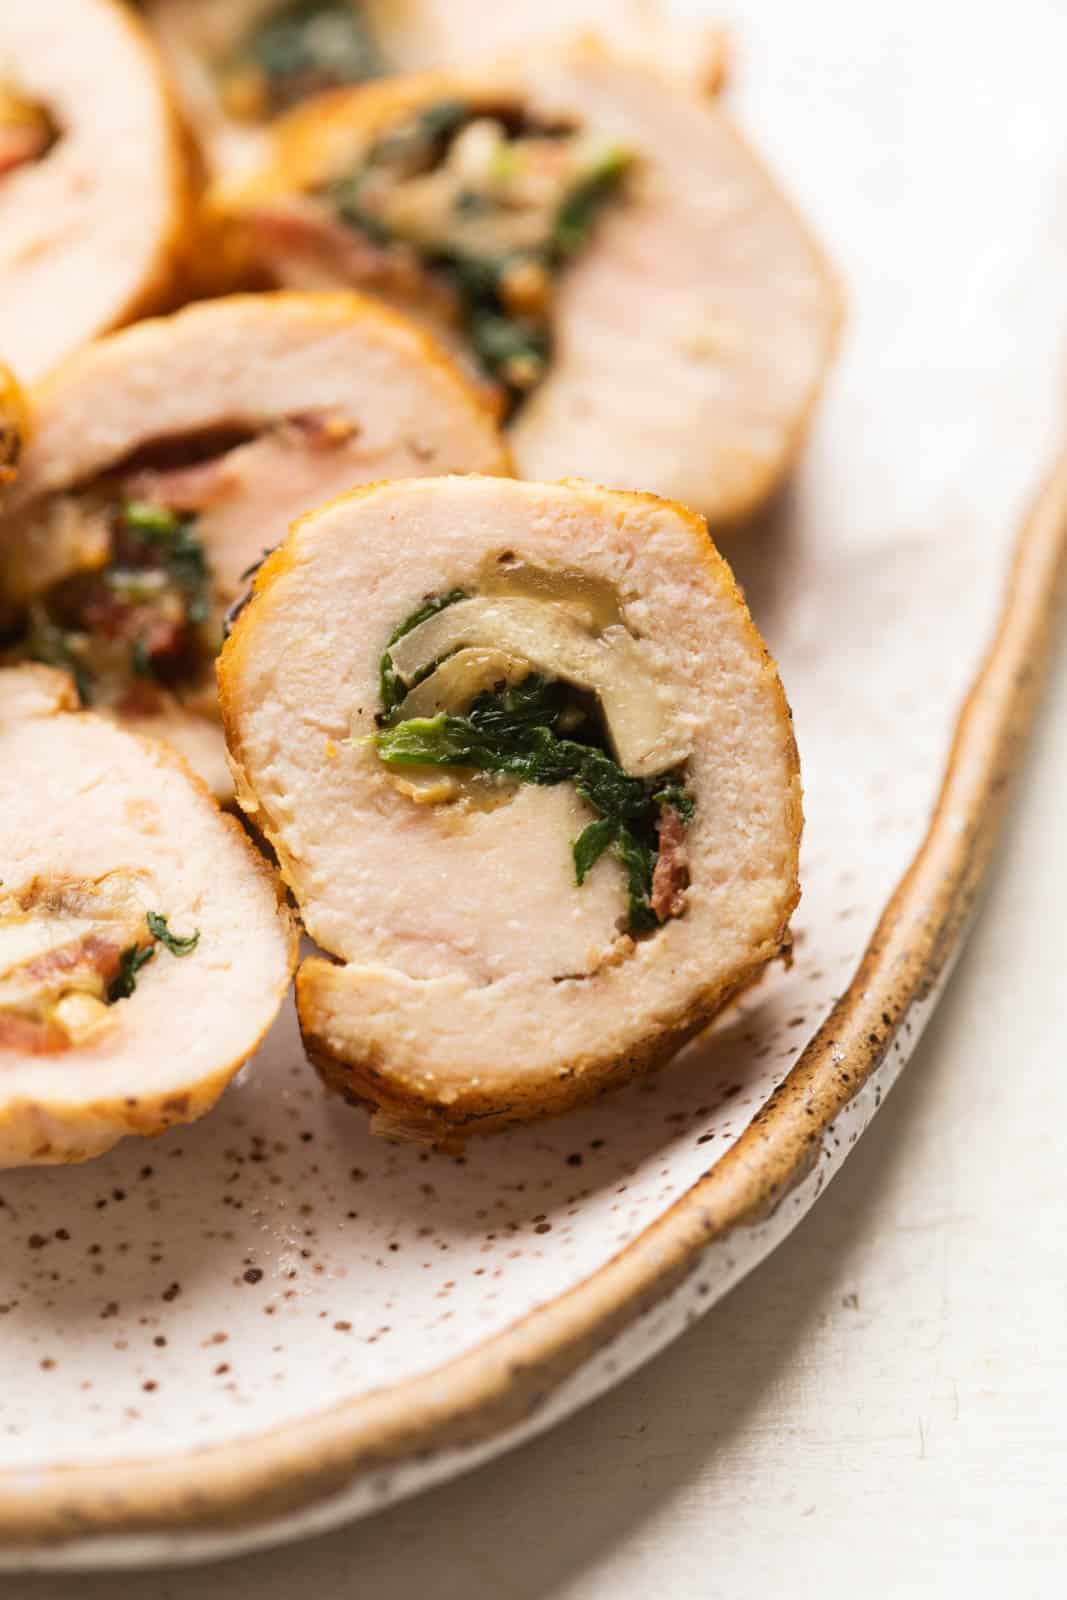 Closeup of a slice of chicken roulade to show the layers and the stuffing inside